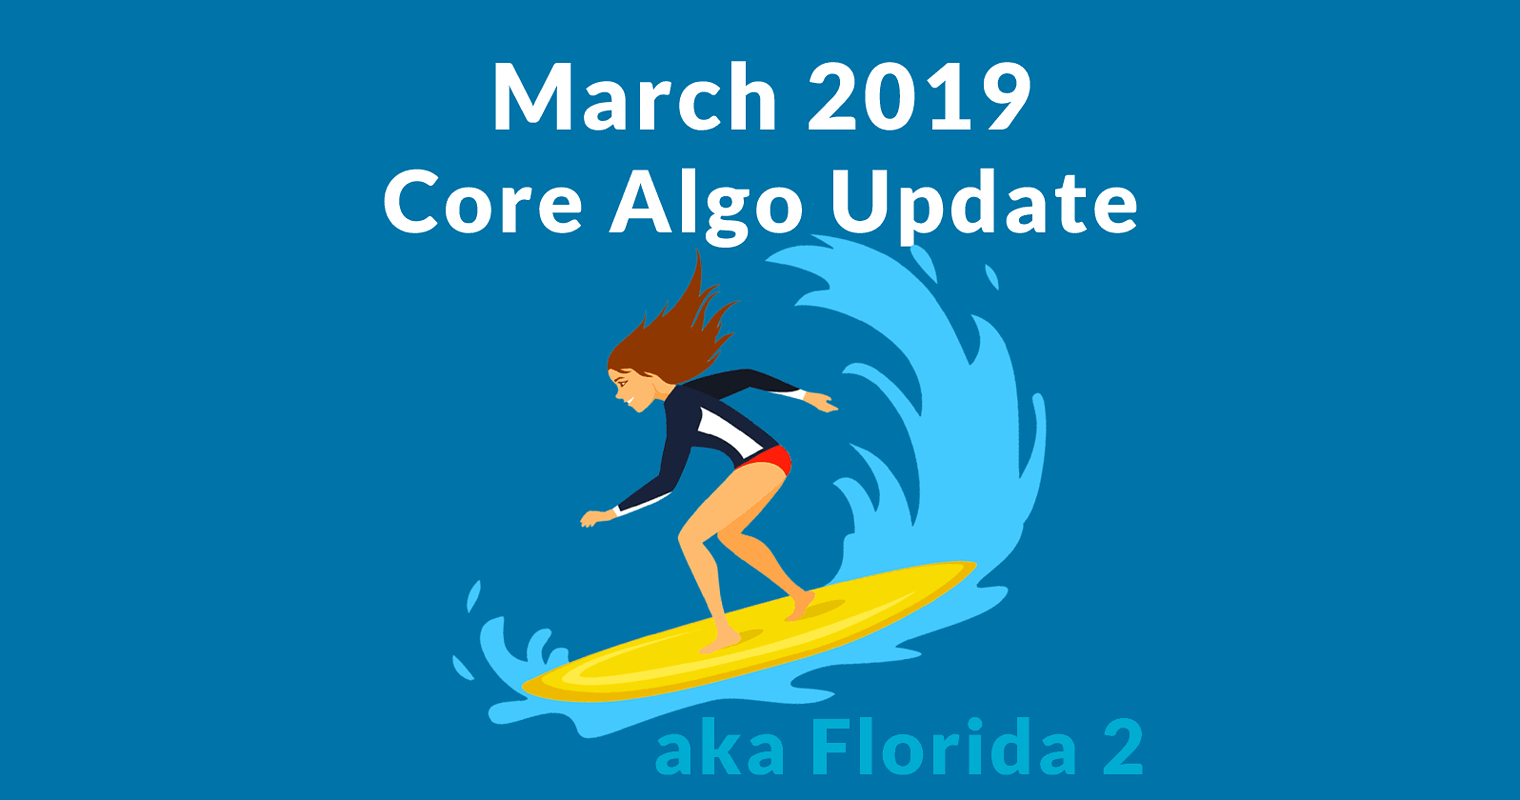 March 2019 Core Update: What’s Changed? Early Insights & Reaction